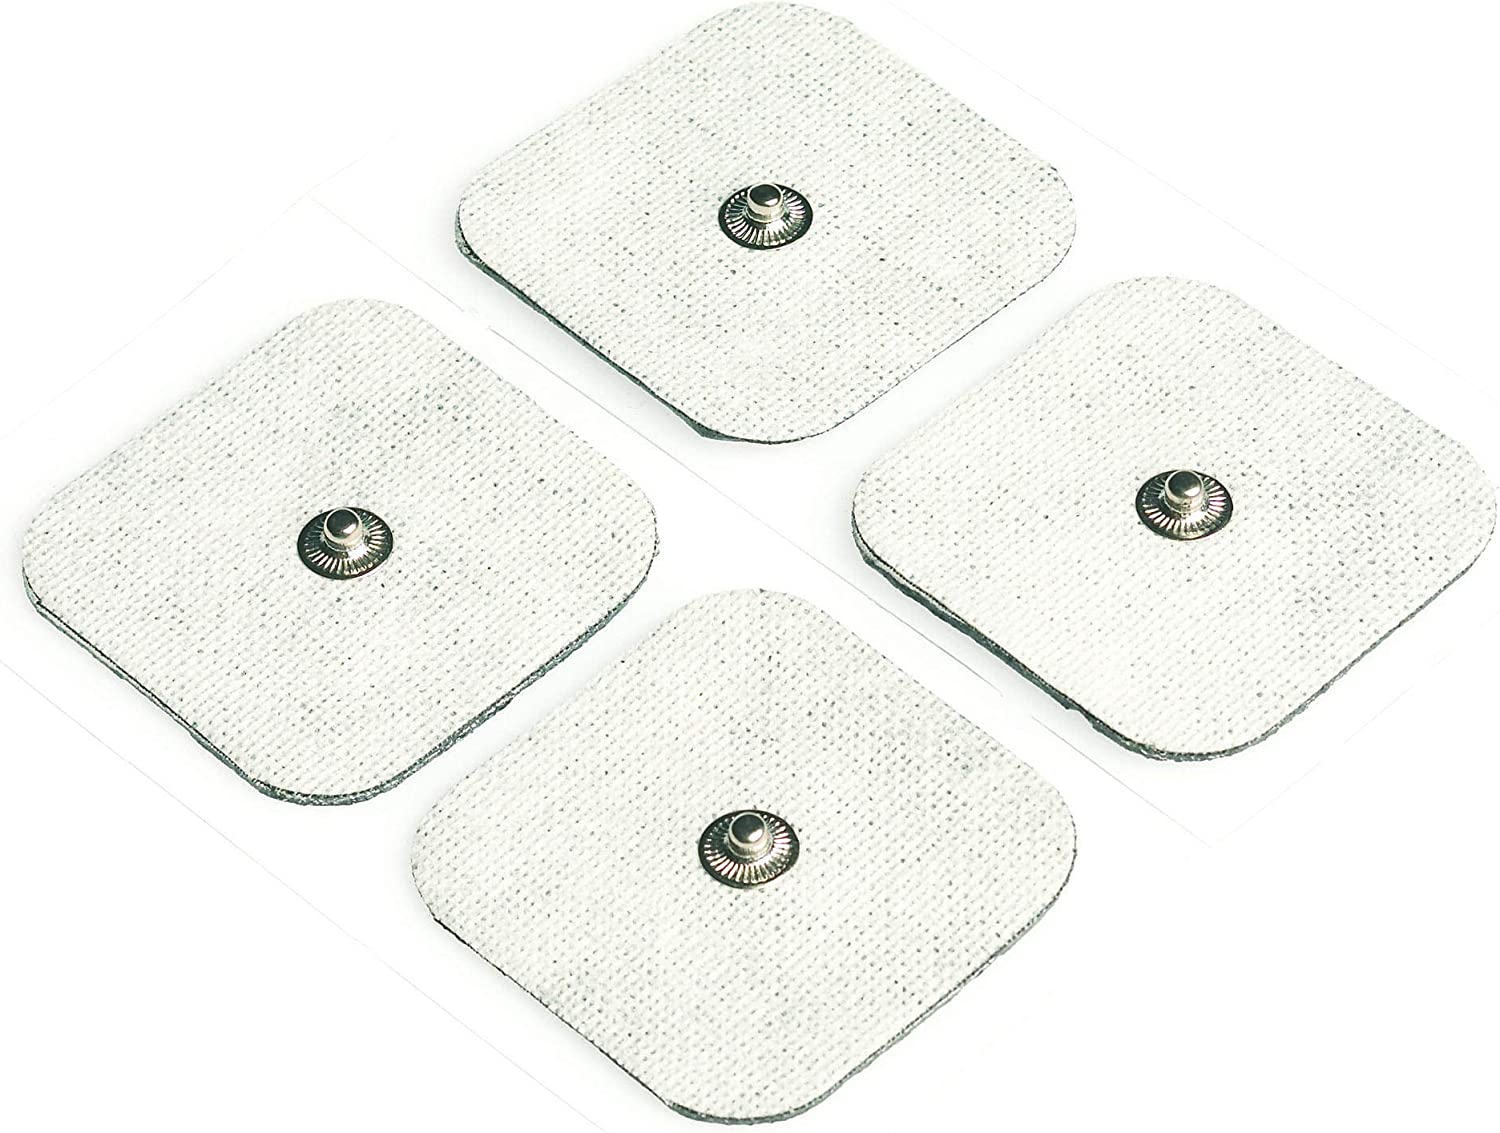 Beurer Replacement set of self-adhesive gel electrode pads, 45 x 45 mm, consisting of 8 pads, suitable for Beurer and Sanitas EMS/TENS devices.